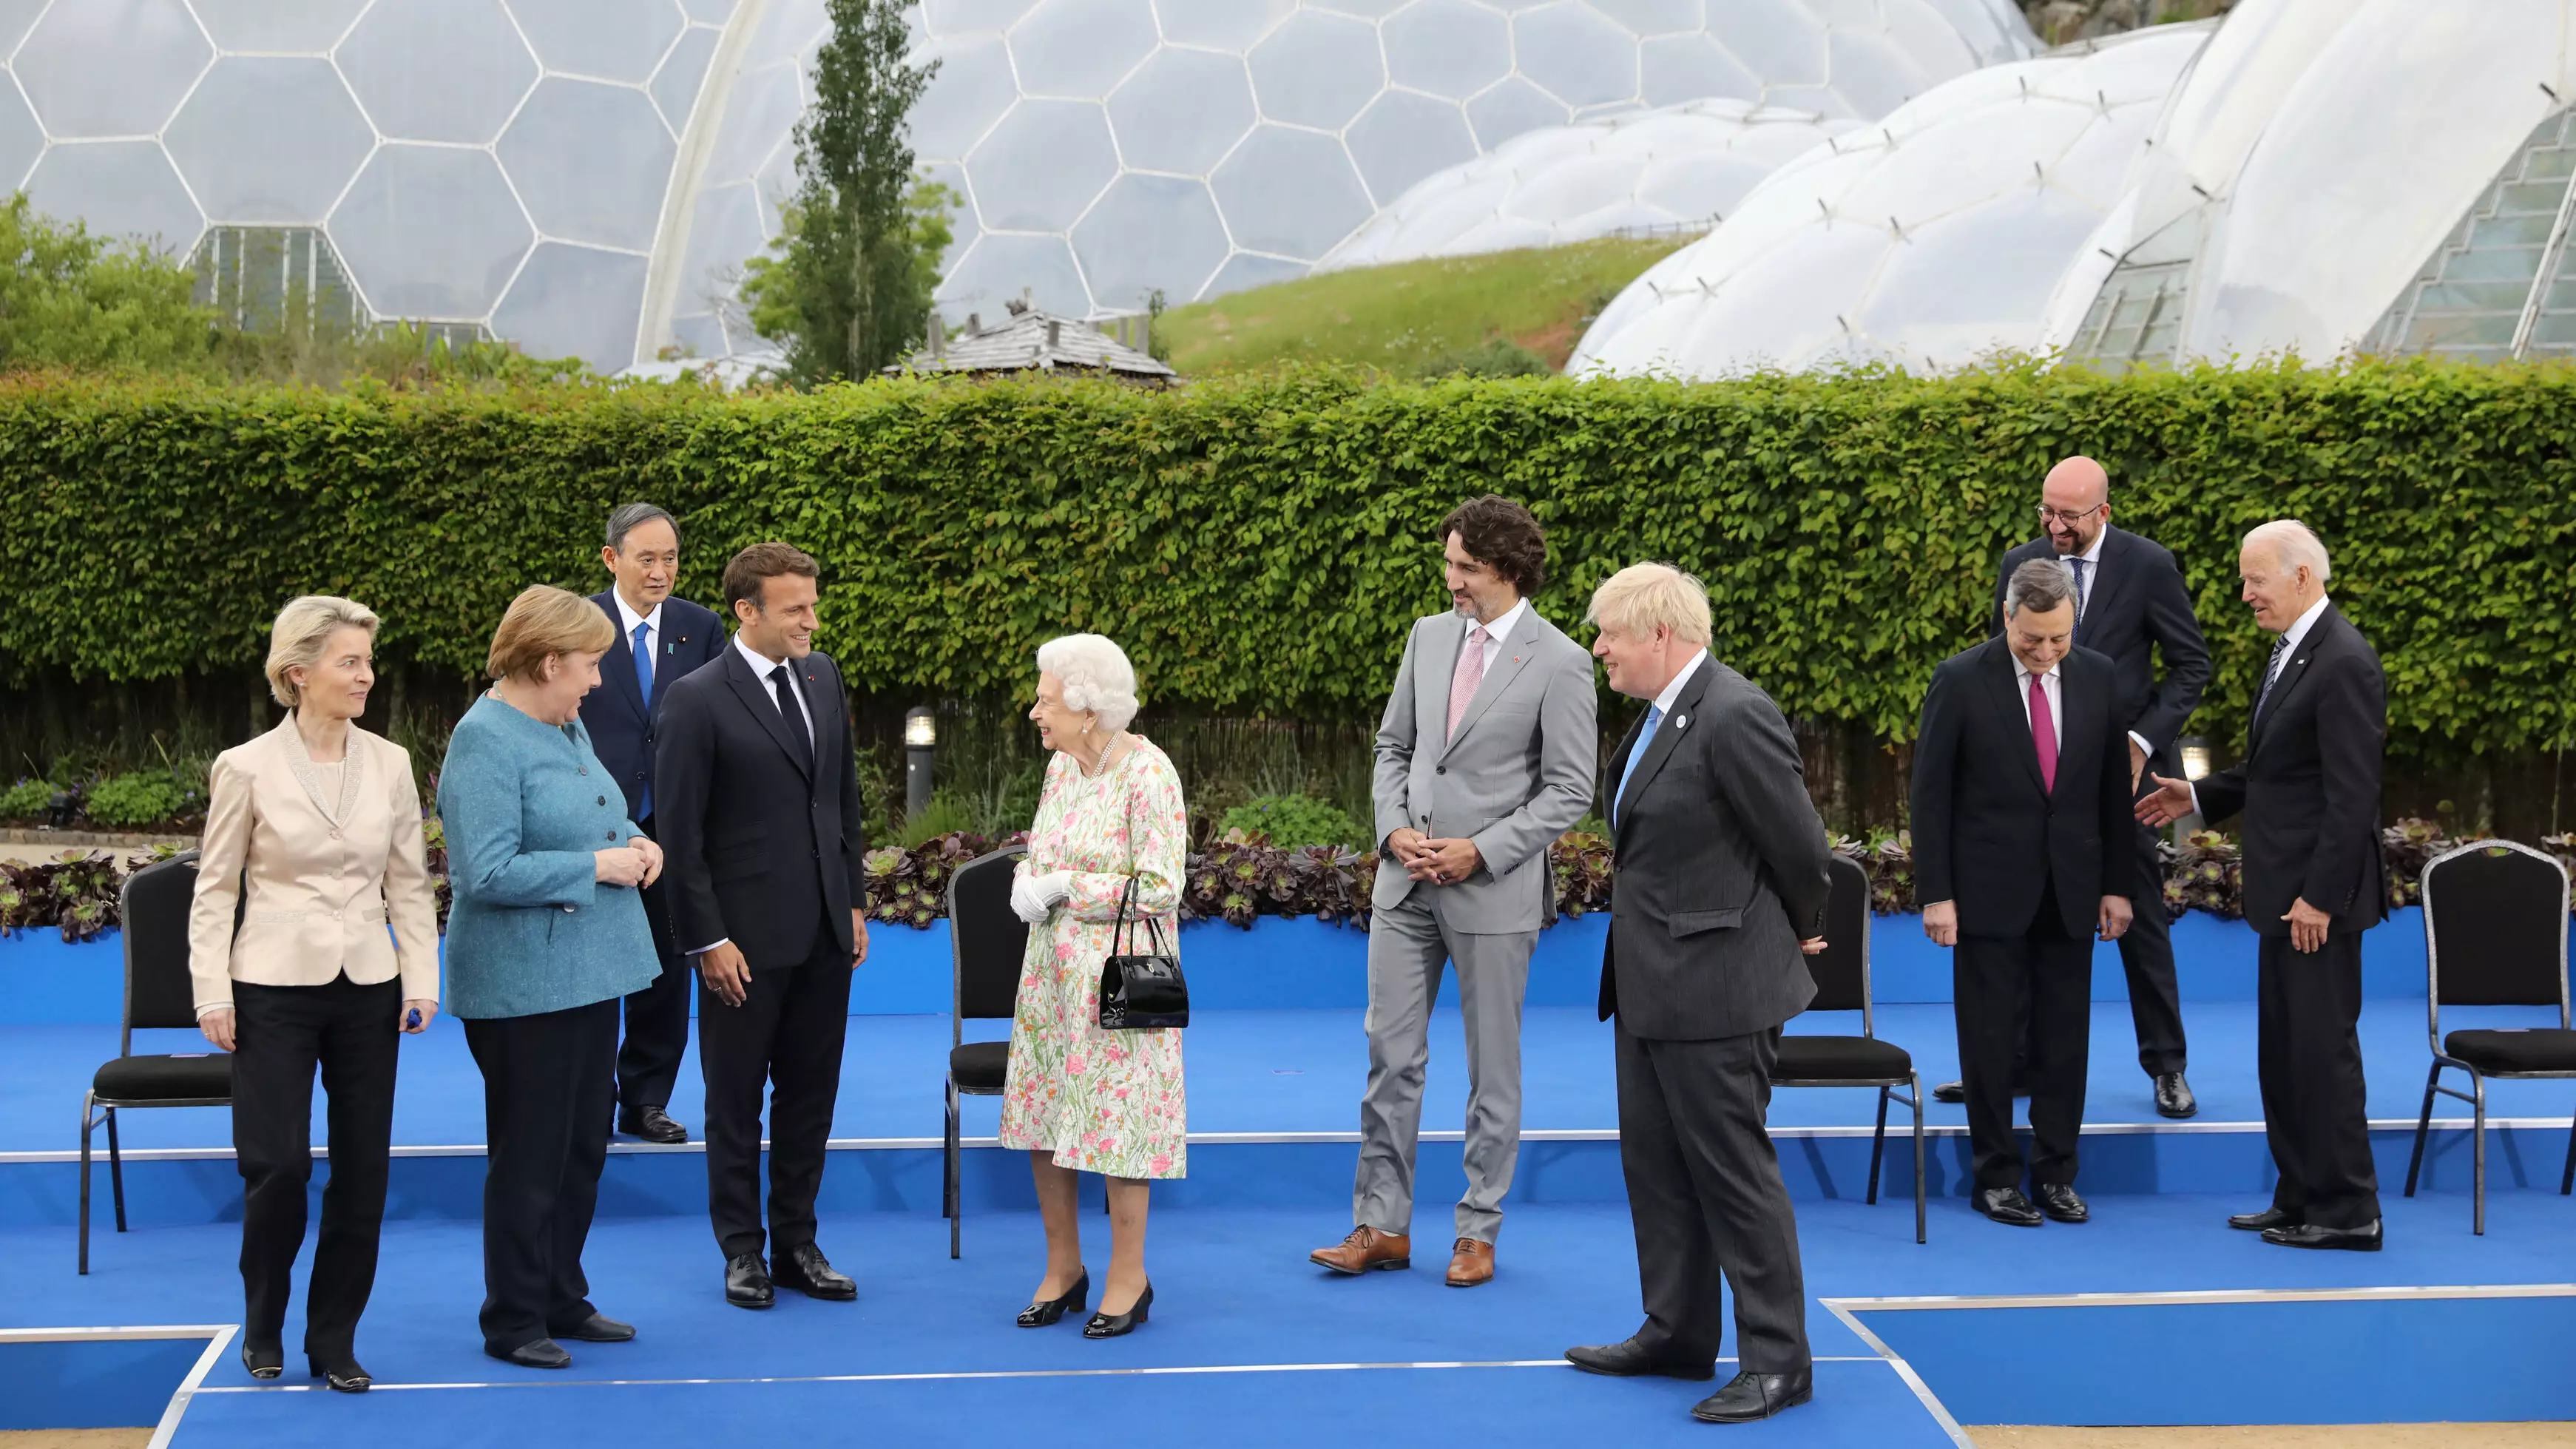 The Queen Jokes With All G7 Leaders While Posing For Photo